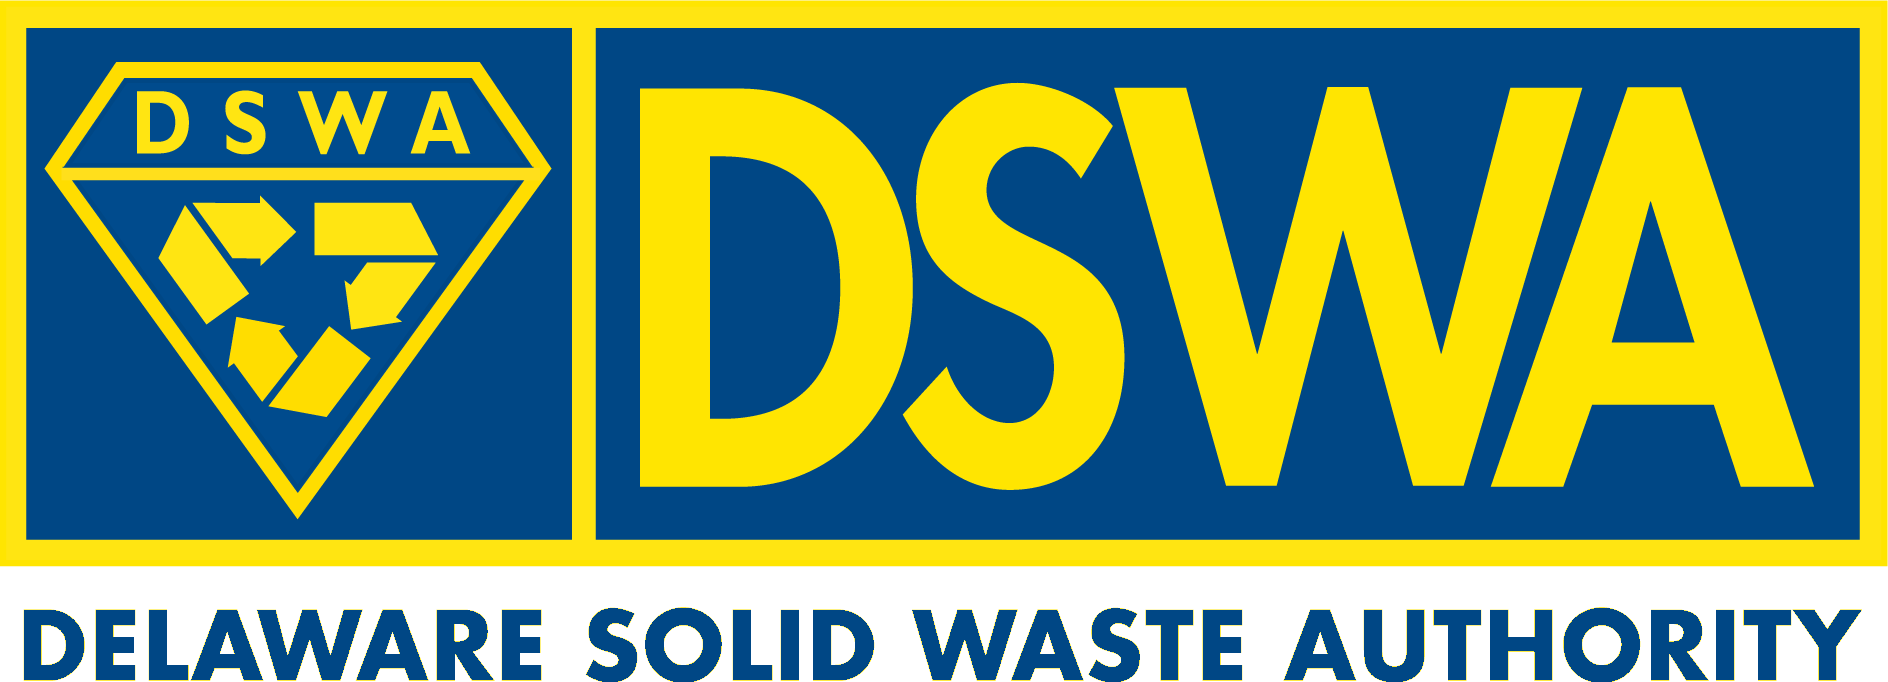 Delaware Solid Waste Authority logo